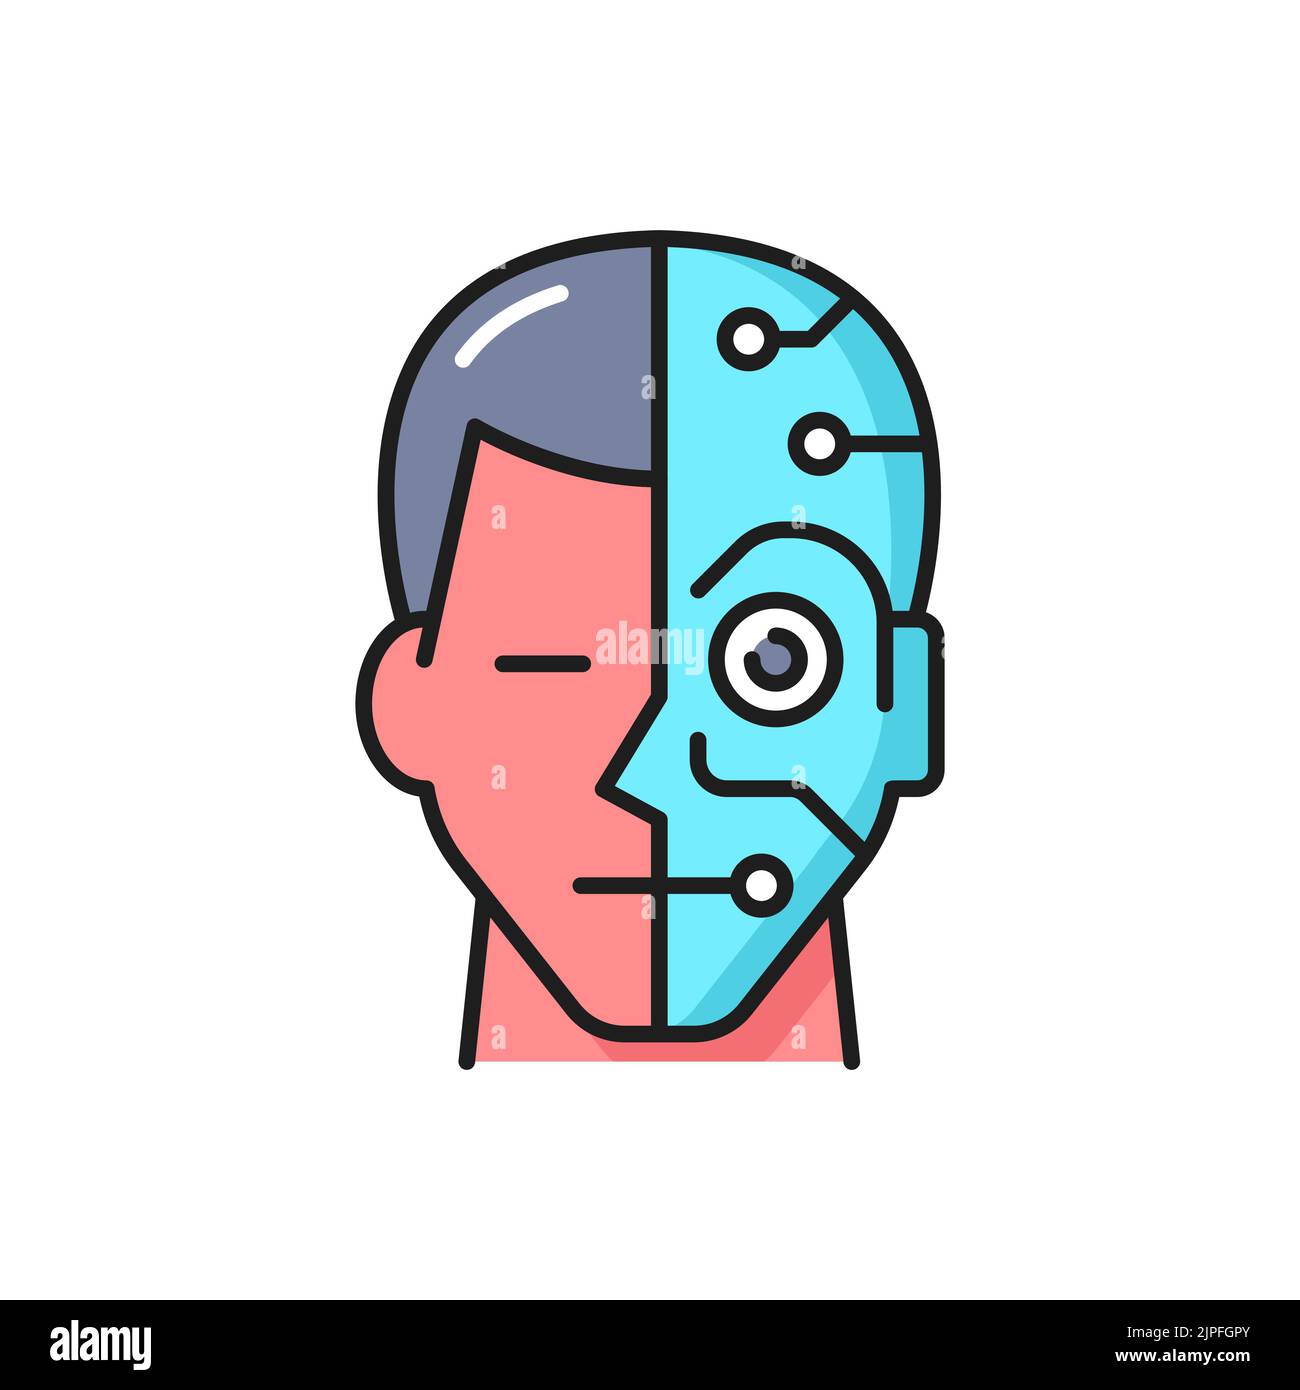 Artificial intelligence, robotic technology outline icon with human and cyborg face. Intelligent machine, humanoid robots and AI innovation thin line vector symbol or icon Stock Vector